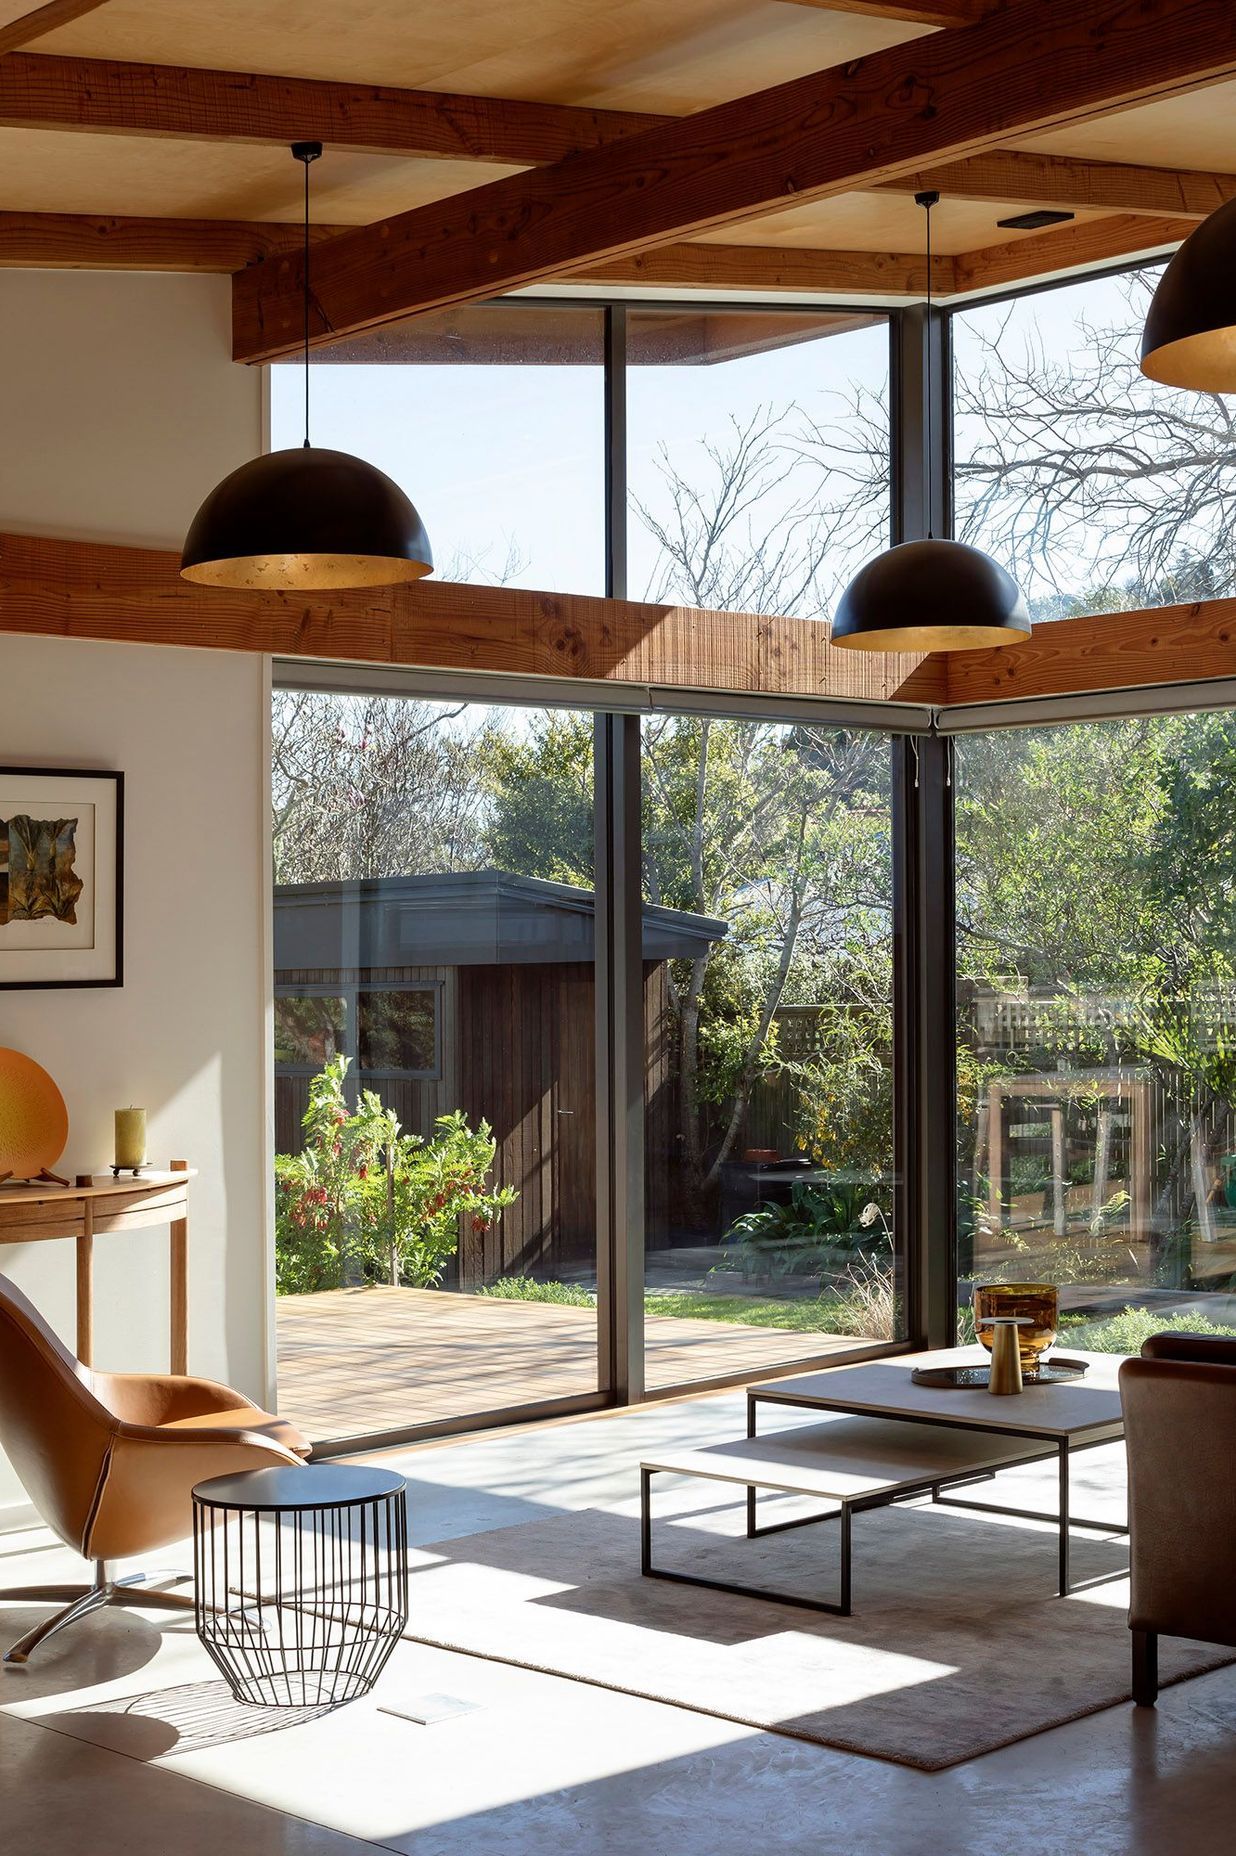 The key delineation between different areas of the house is defined by the ceilings that move from a low stud in the bedrooms, right through into the double-height glazing of the public areas